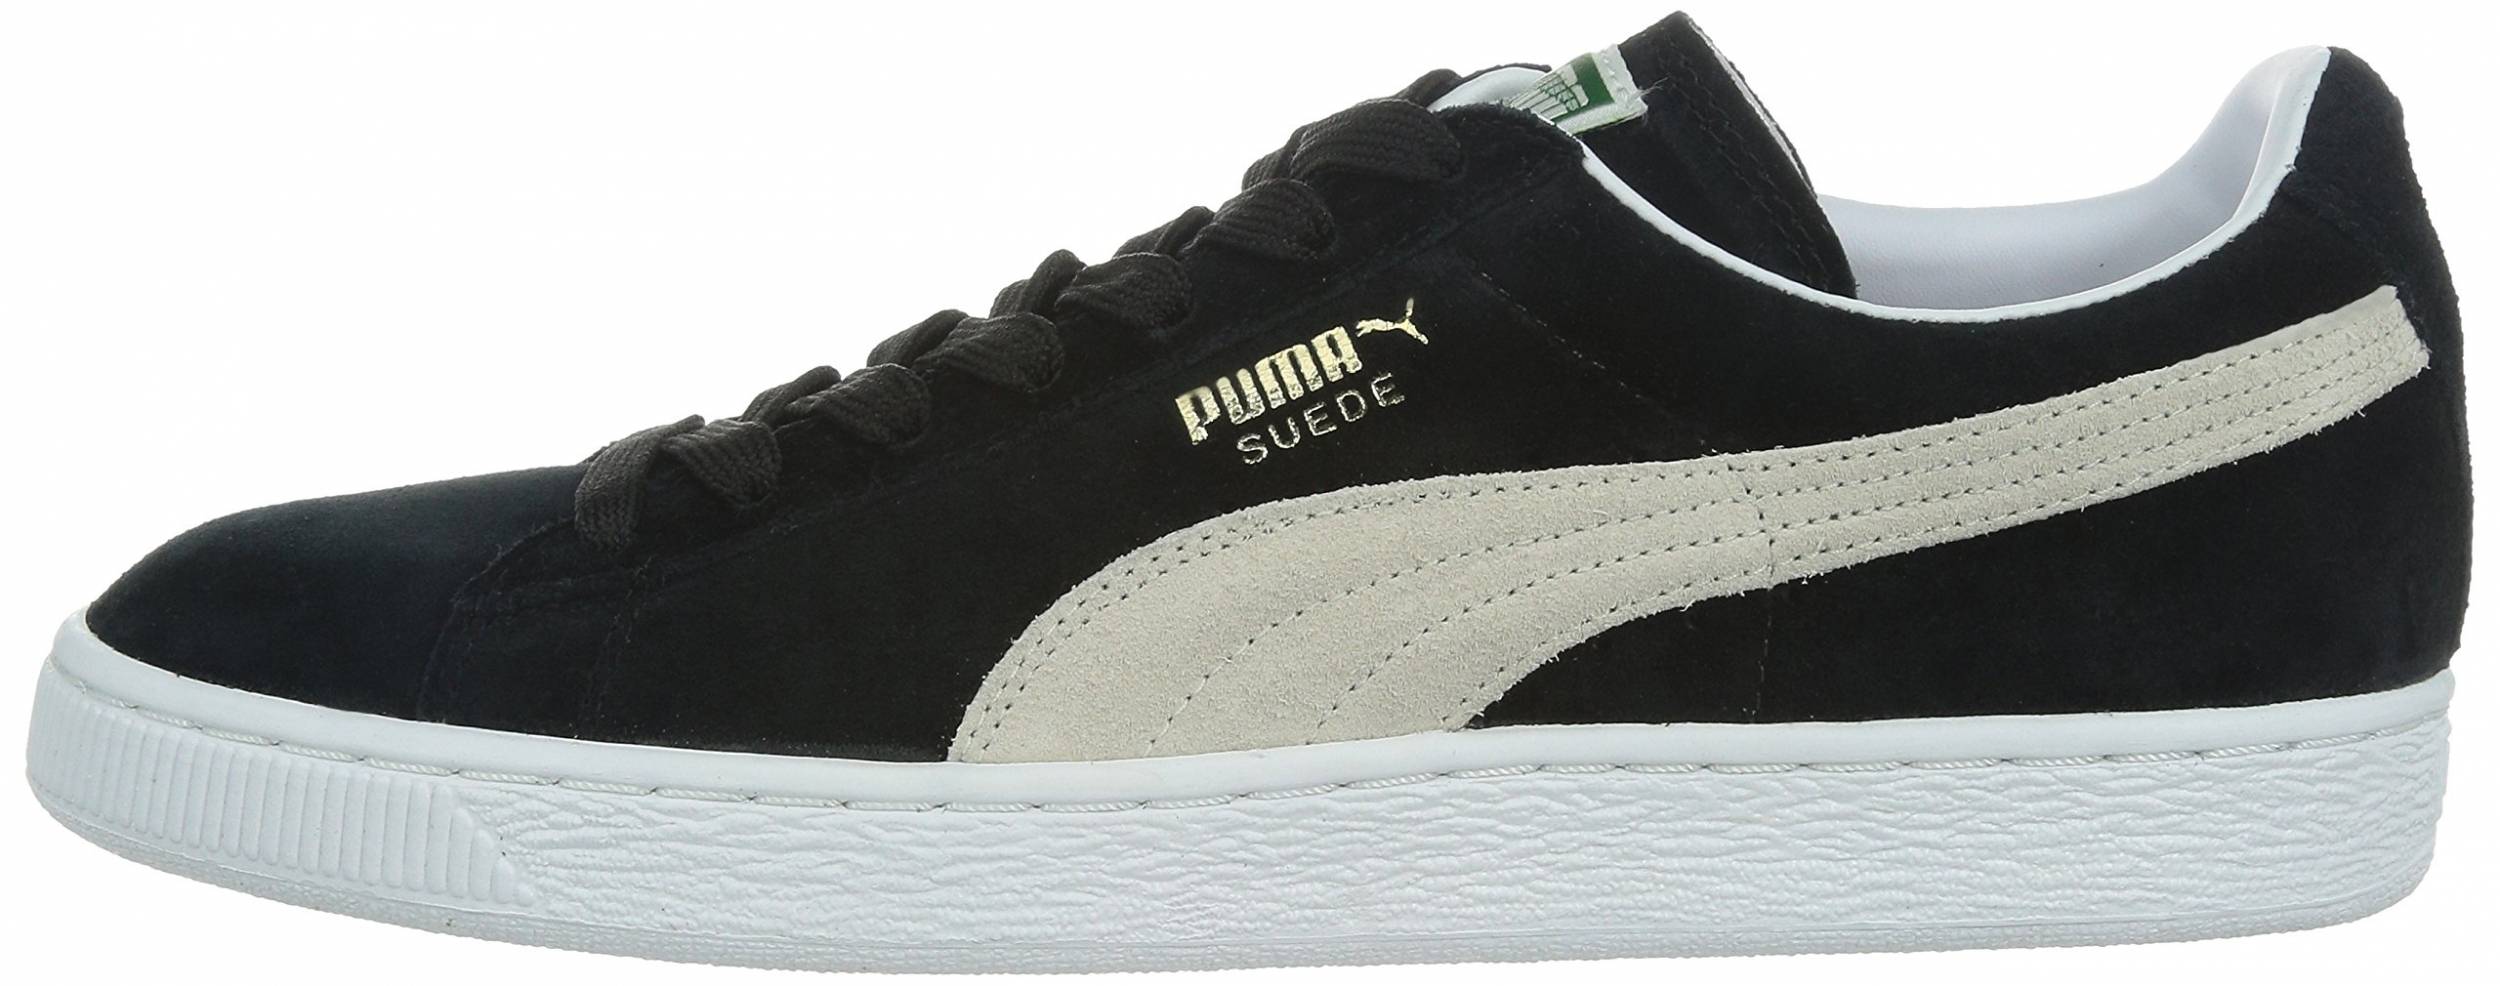 Save 68% on Puma Sneakers (286 Models 